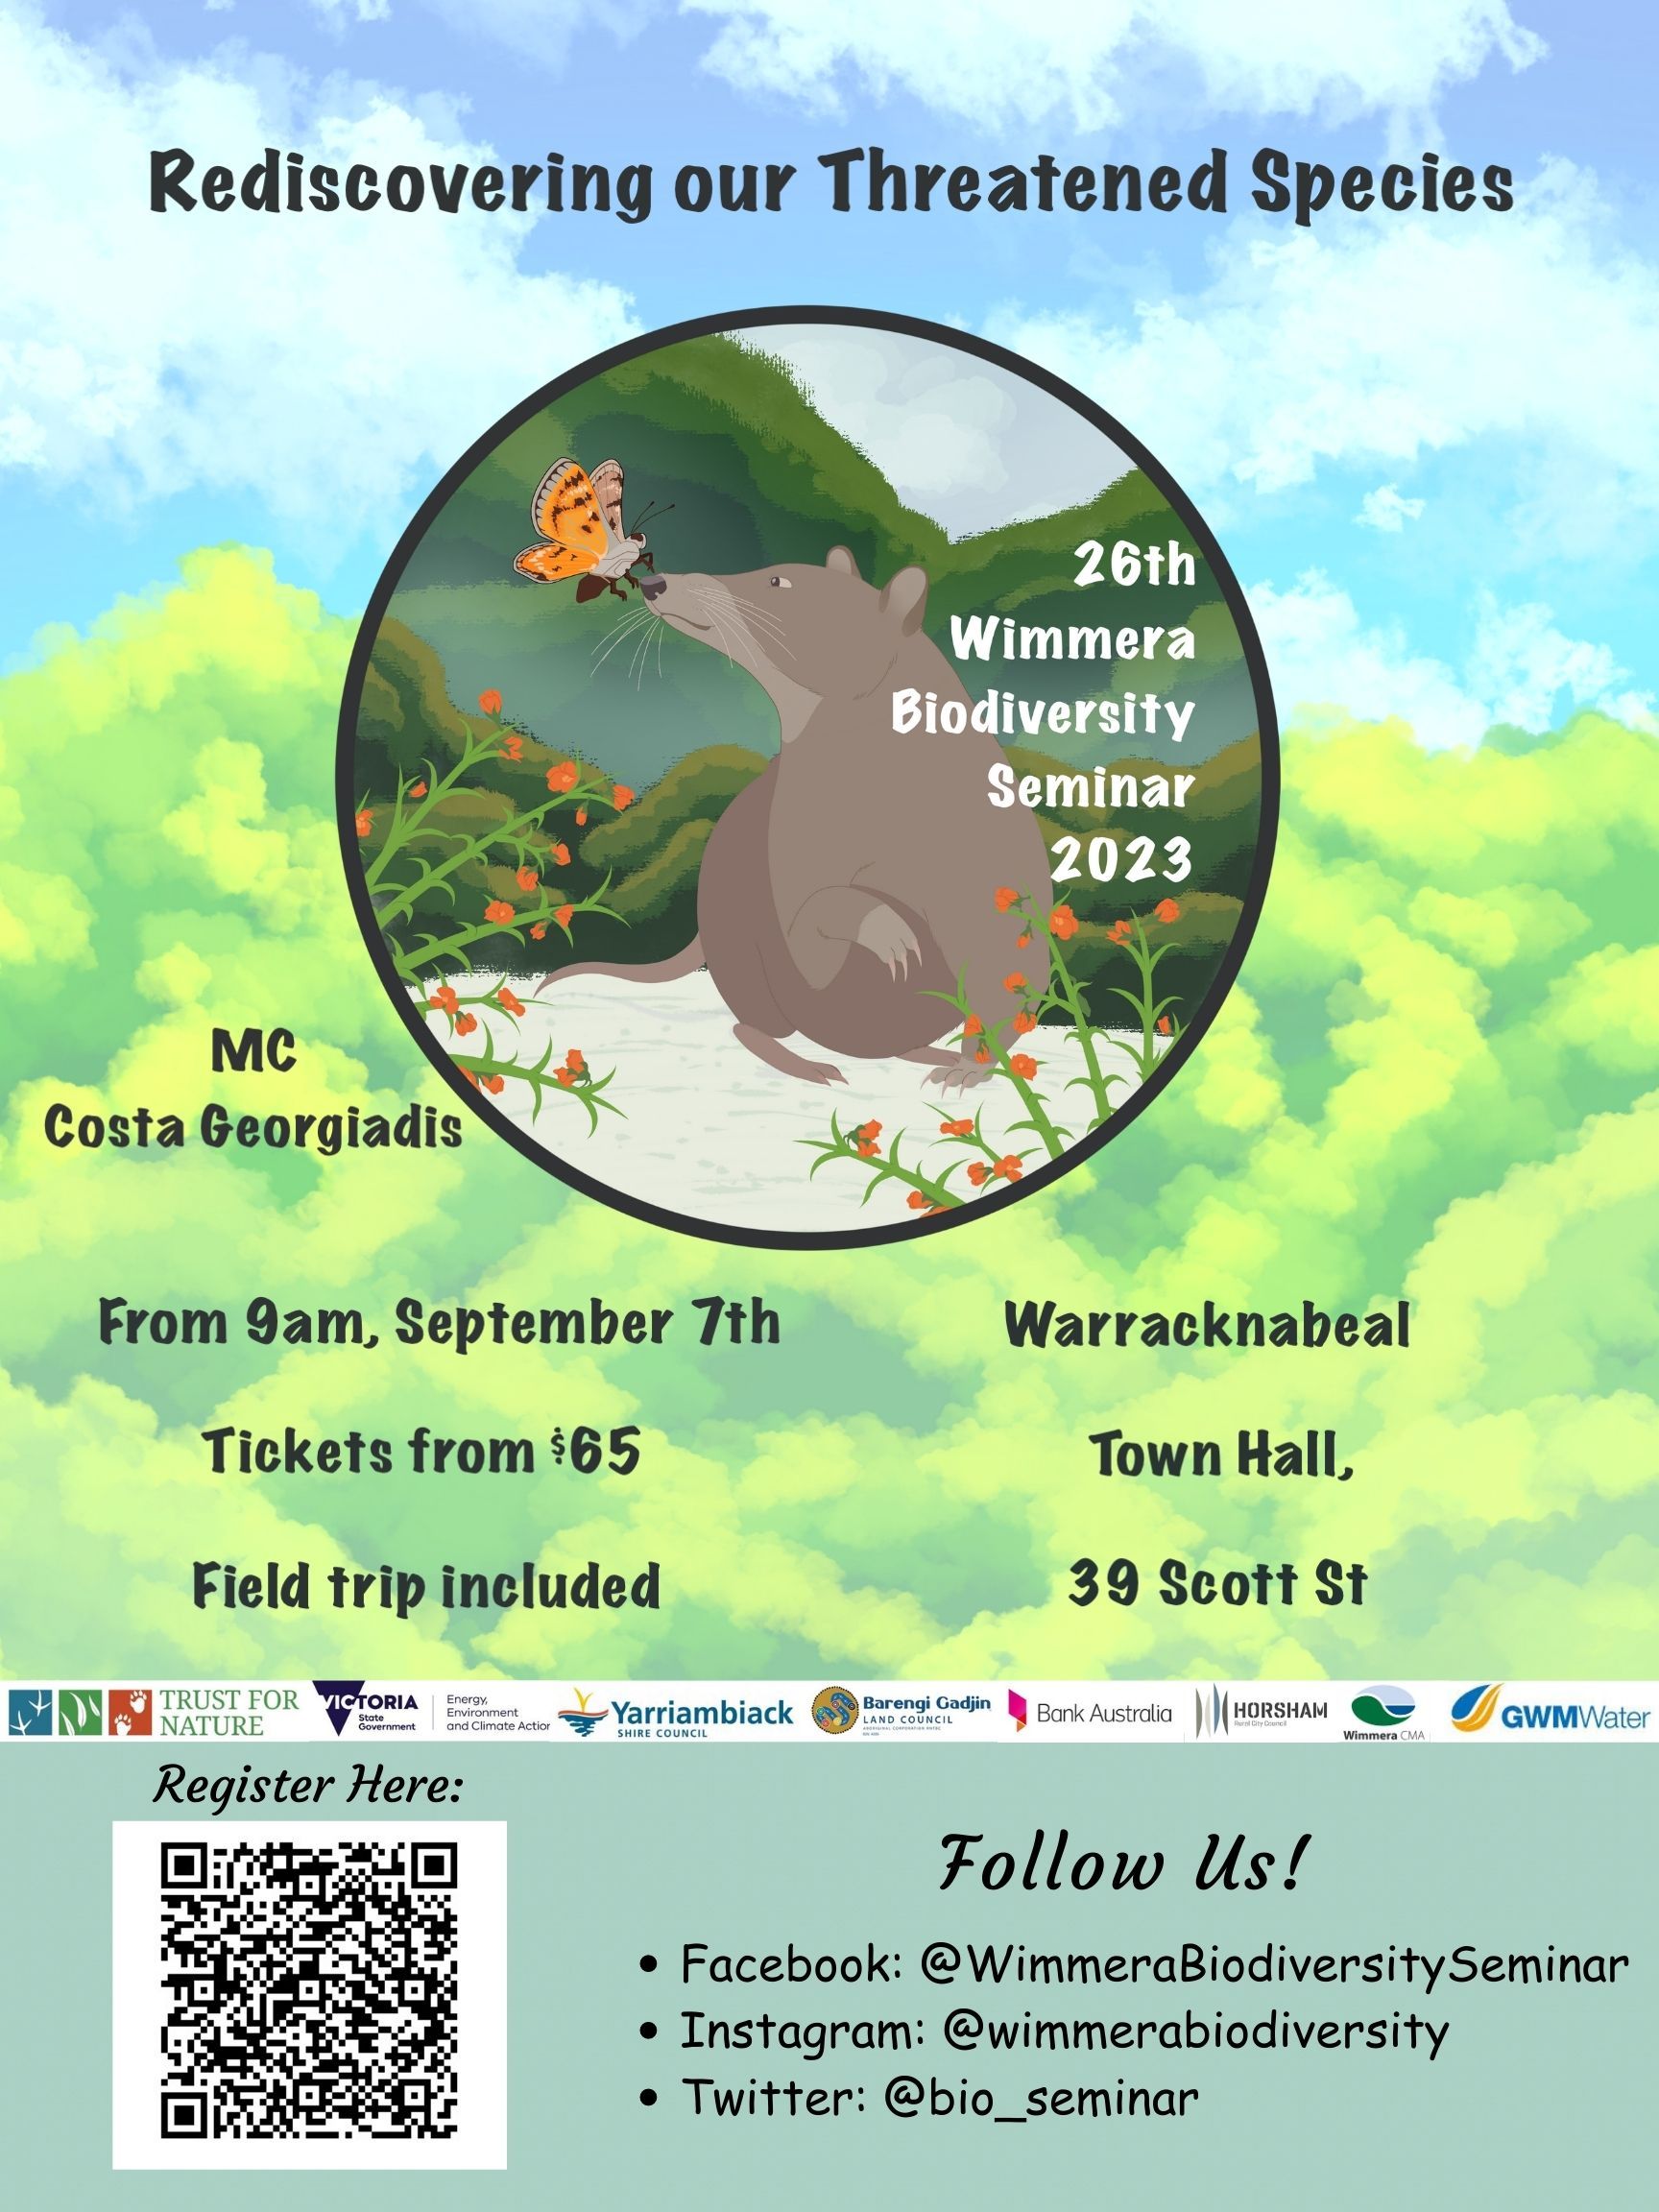 Event Poster Rediscovering our Threatened Species 26th Wimmera Biodiversity Seminar 2023 MC Costa Georgiadis From 9am, September 7th Warracknabeal Town Hall, 39 Scott St Tickets from $65 Field trip included Brought to you by Trust for Nature, Victorian Government DEECA, Yarriambiack Shire Council, Barengi Gadjin Land Council, Bank Australia, Horsham Rural City Council, Wimmera CMA and GWMWater.